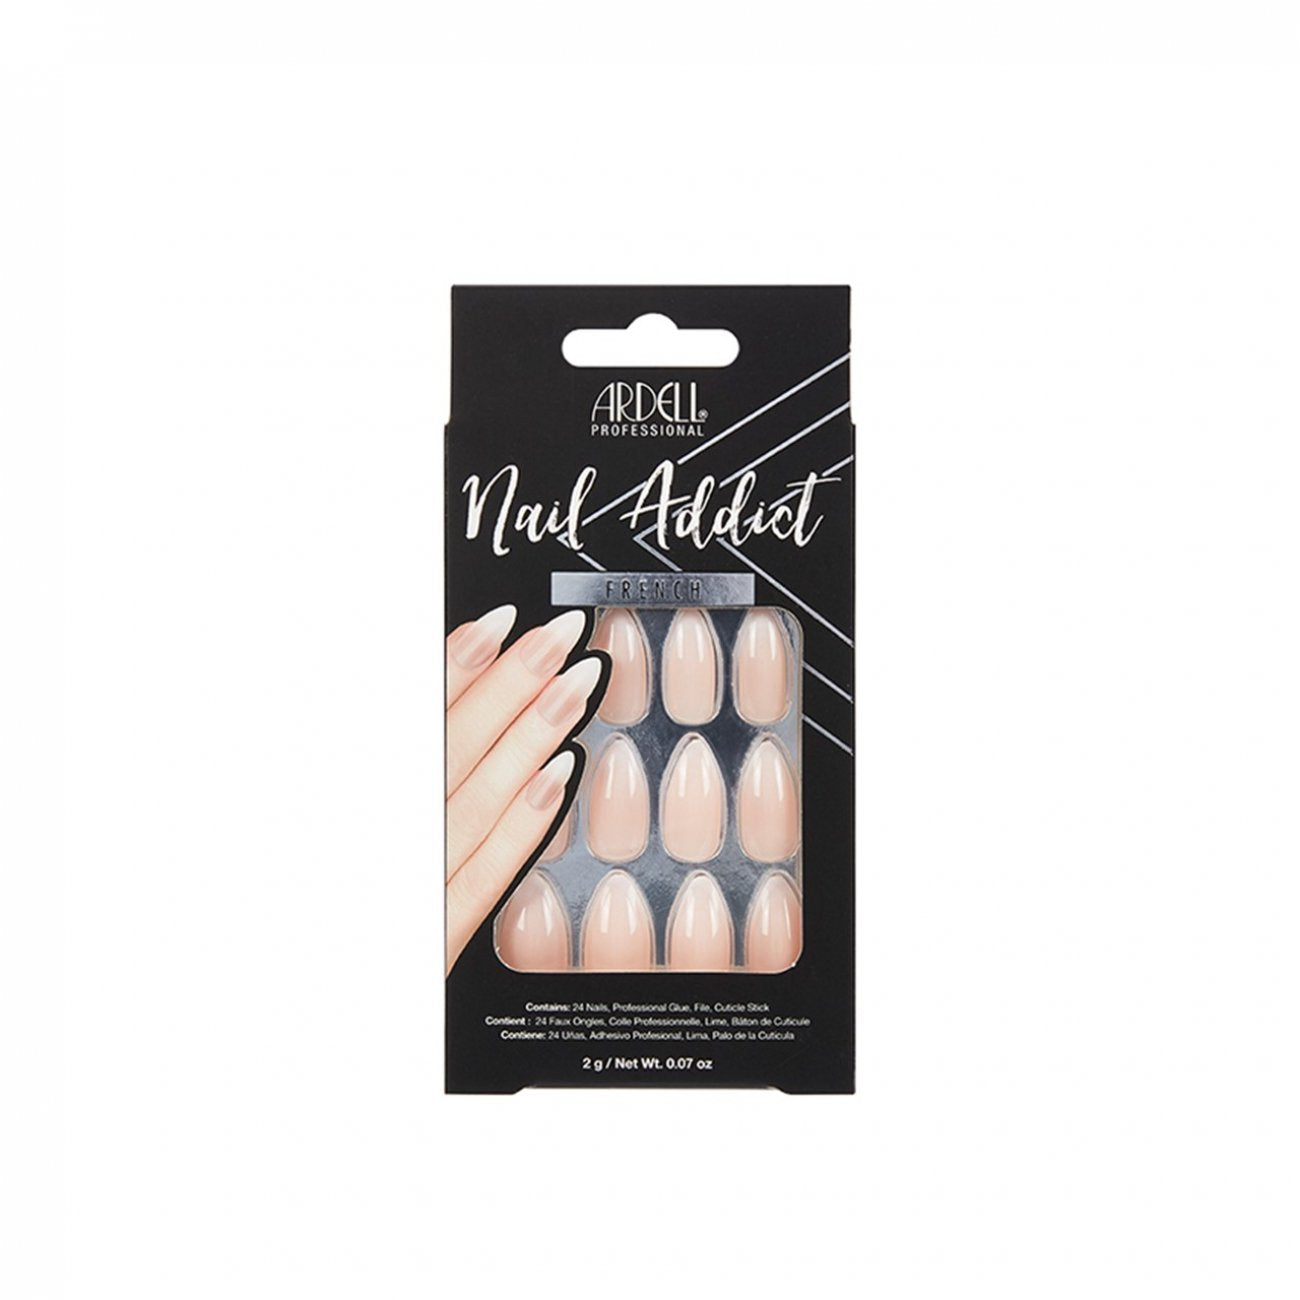 Ardell Nail Addict French Artificial Nails Ombre Fade x24